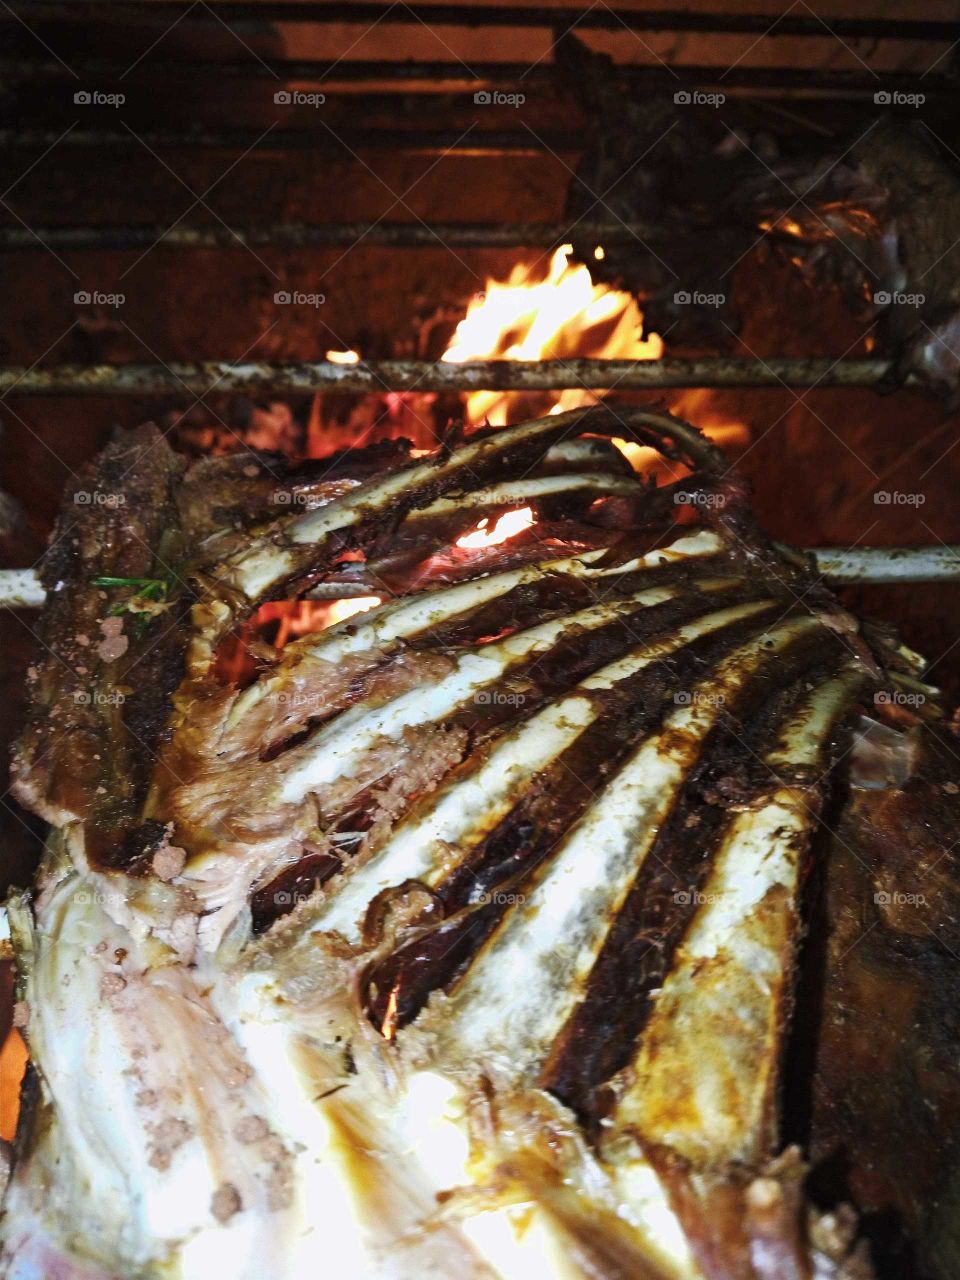 Picture of a Lamb rib in a barbecue grill, in Brazil. Delicious meat with barbecue sauce.